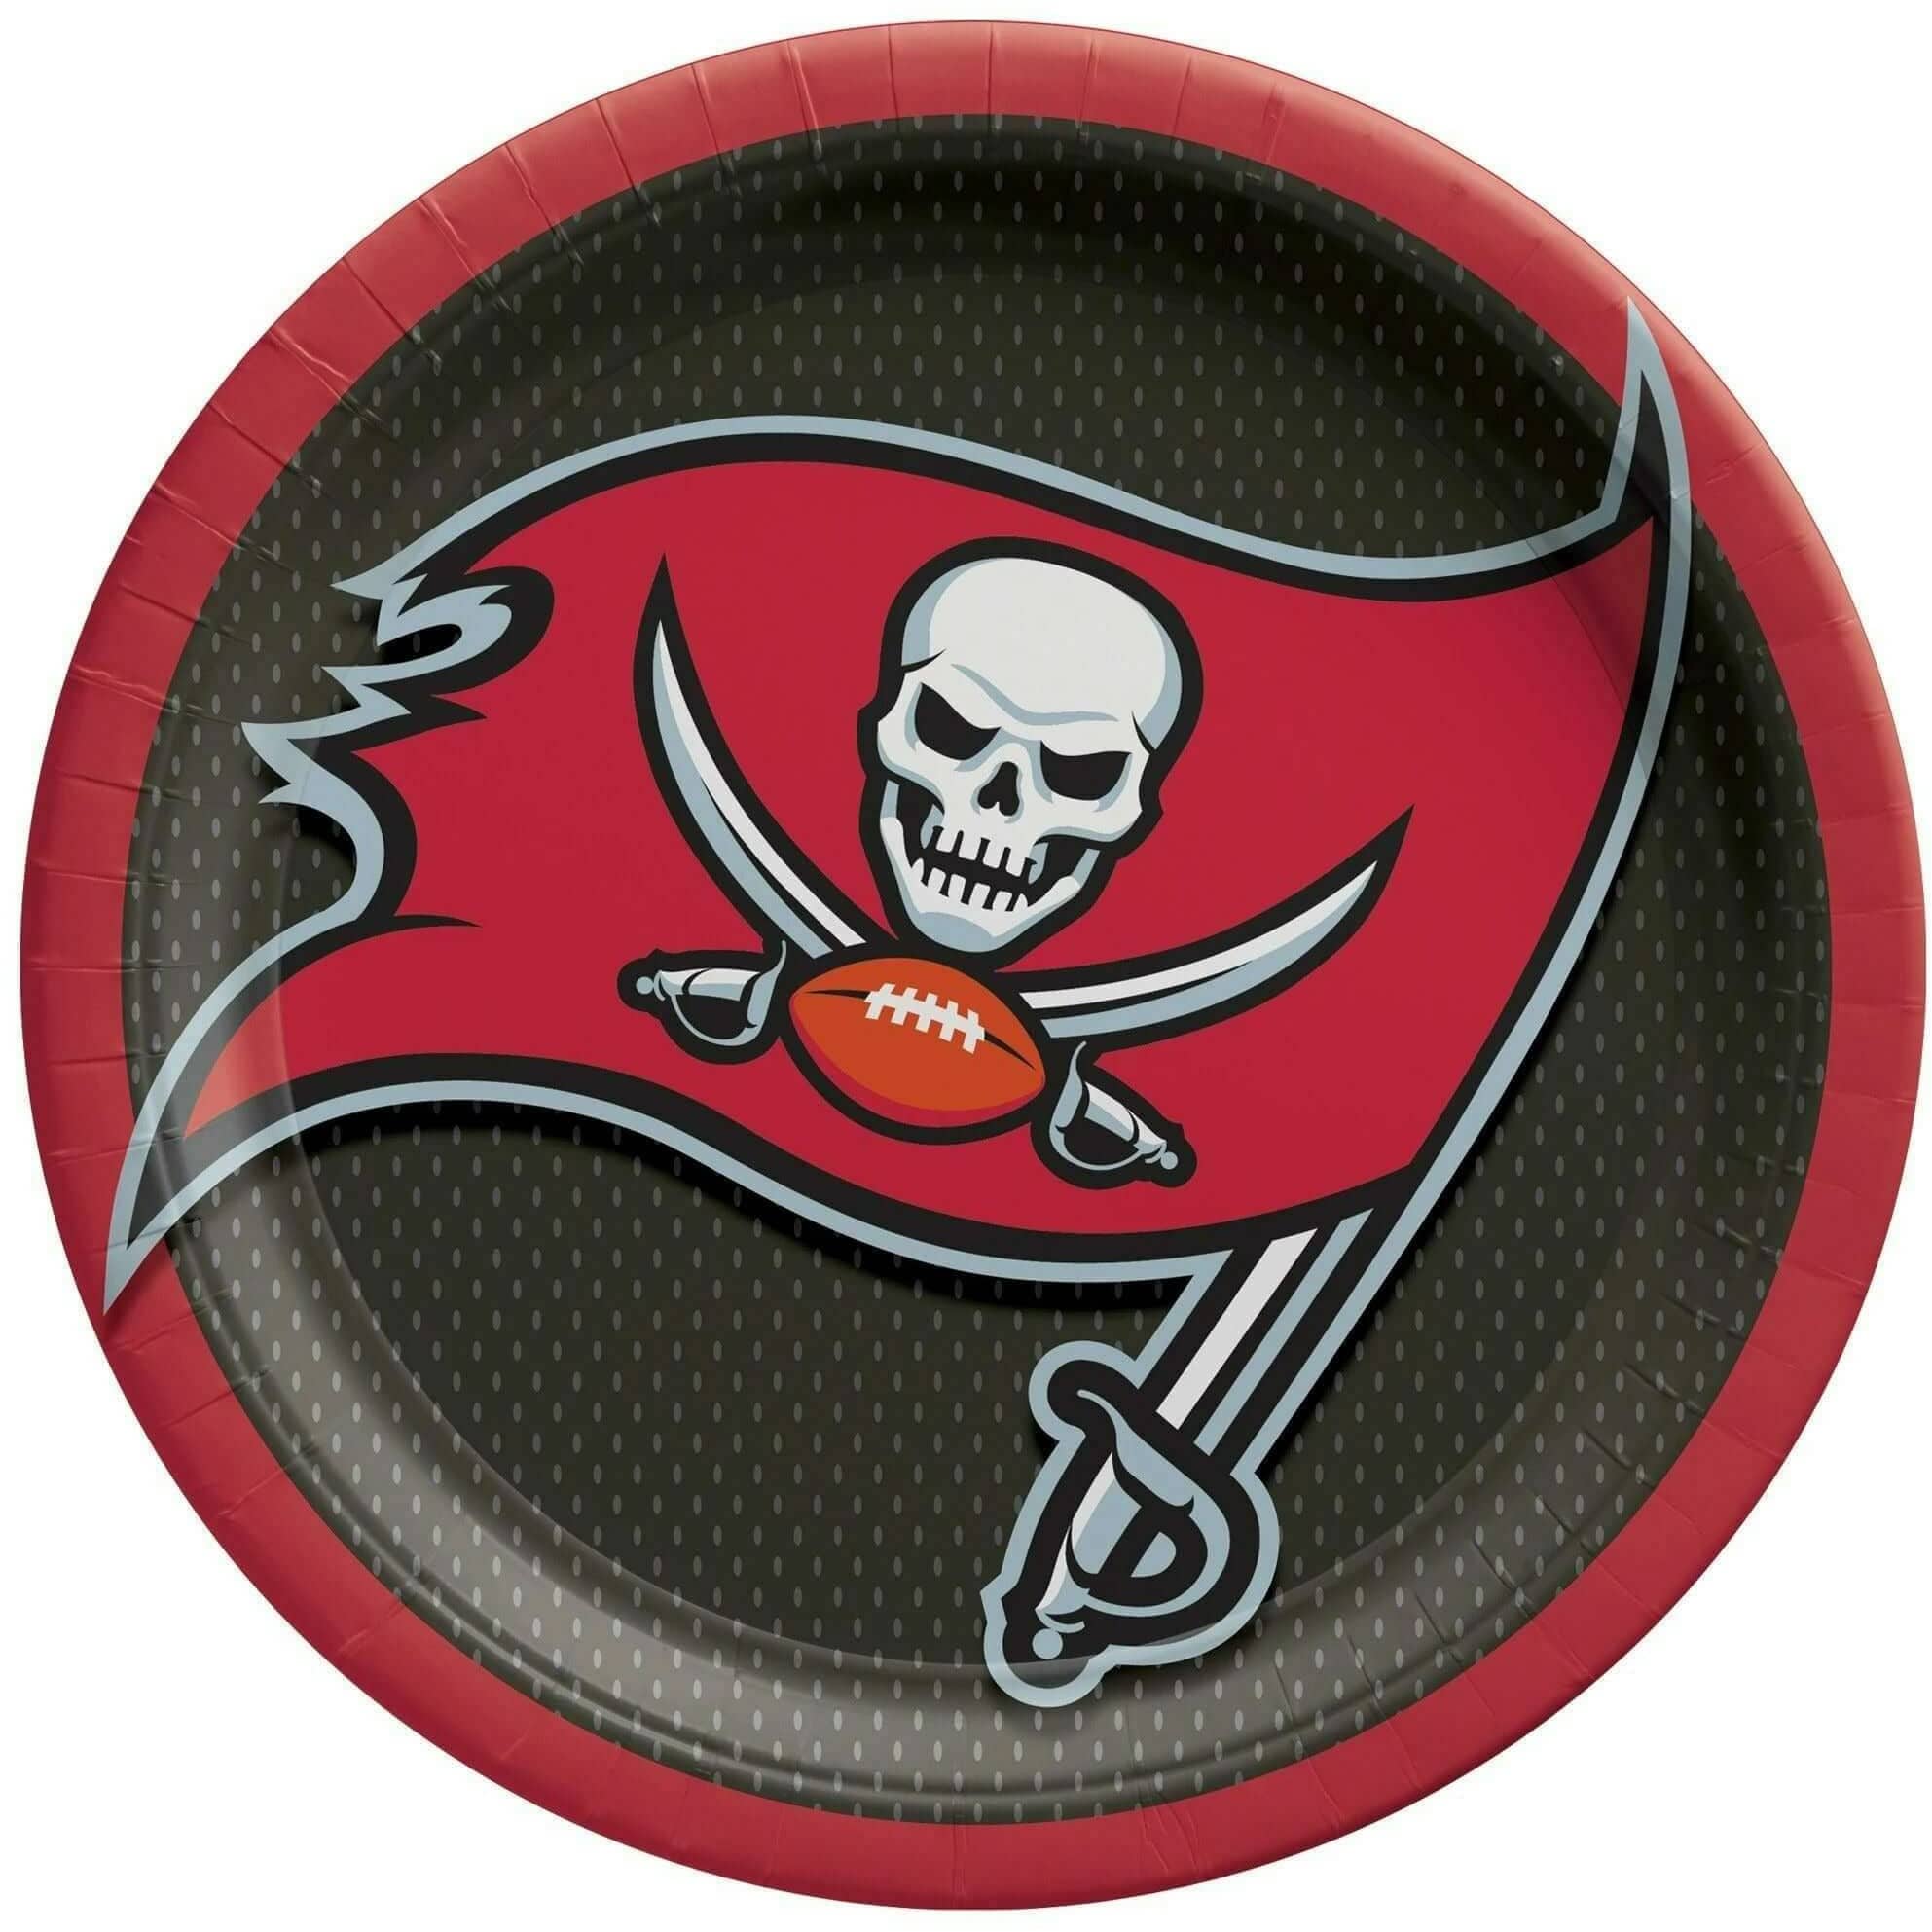 Amscan THEME: SPORTS Tampa Bay Buccaneers 9" Round Plates